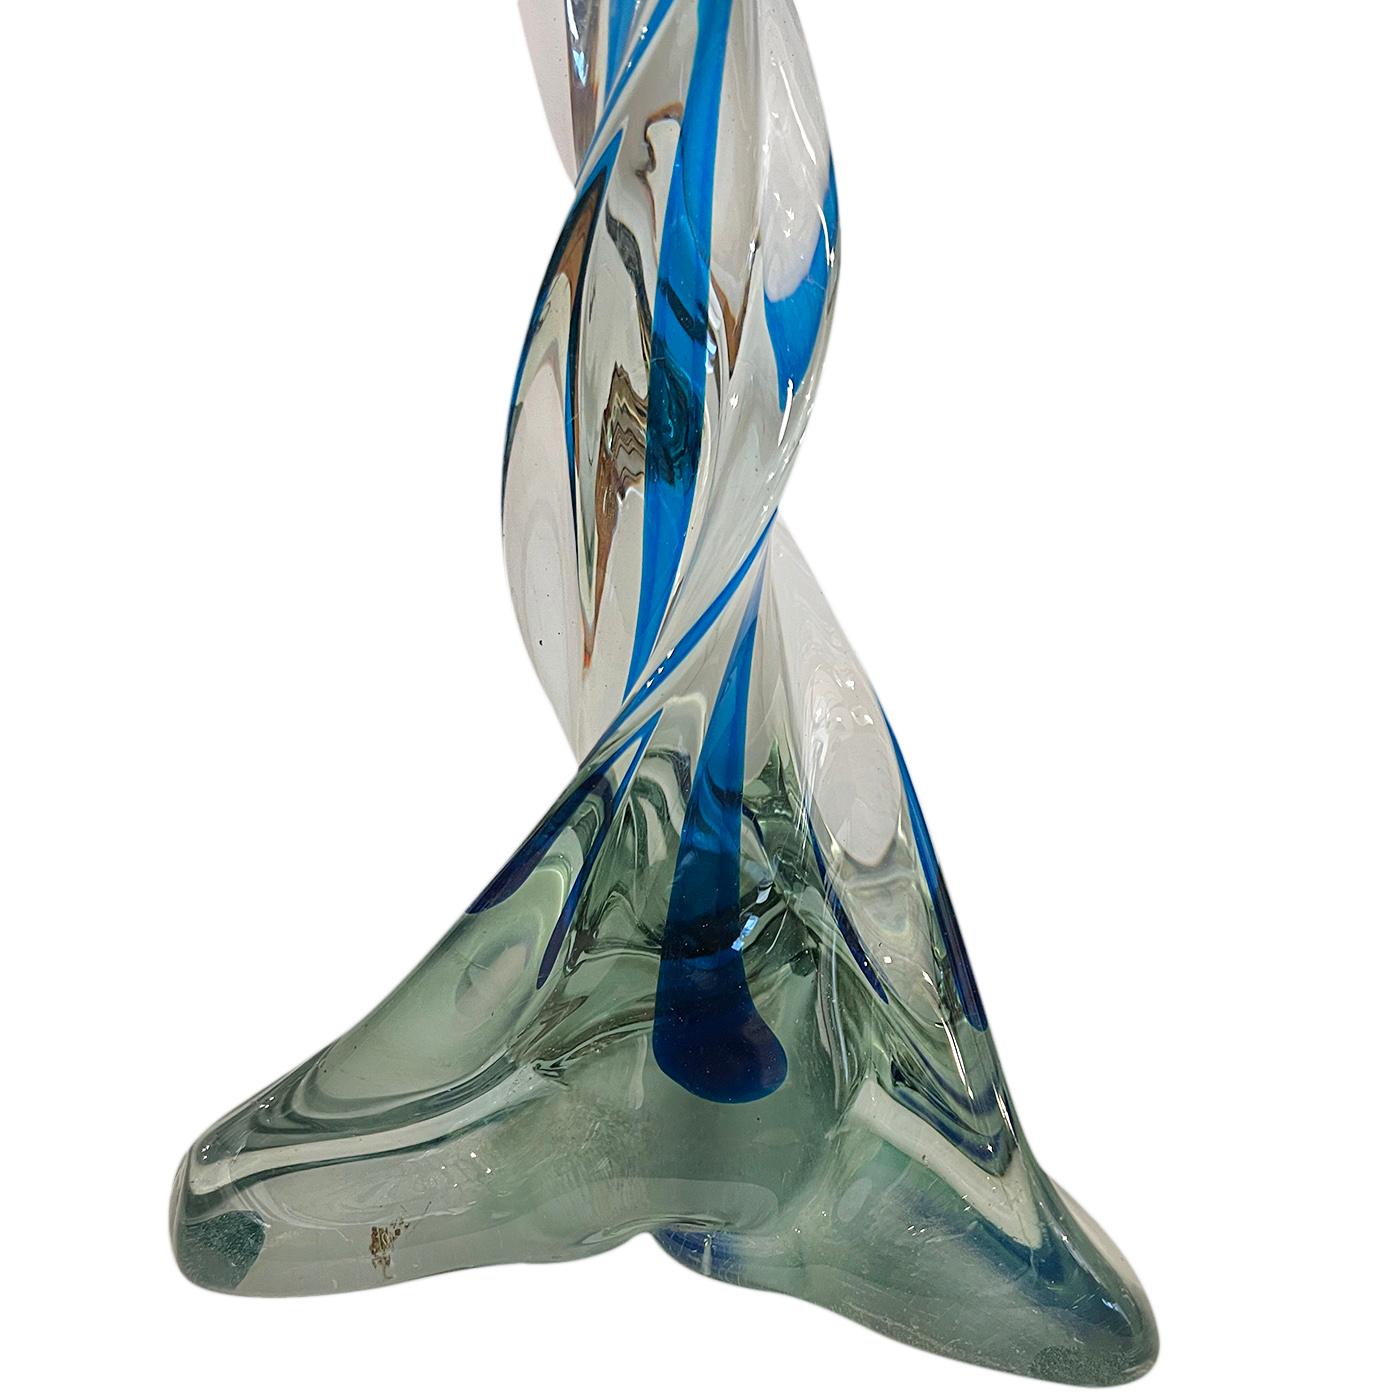 A circa 1920’s Murano glass table lamp.

Measurements:
Height of body: 17.5?